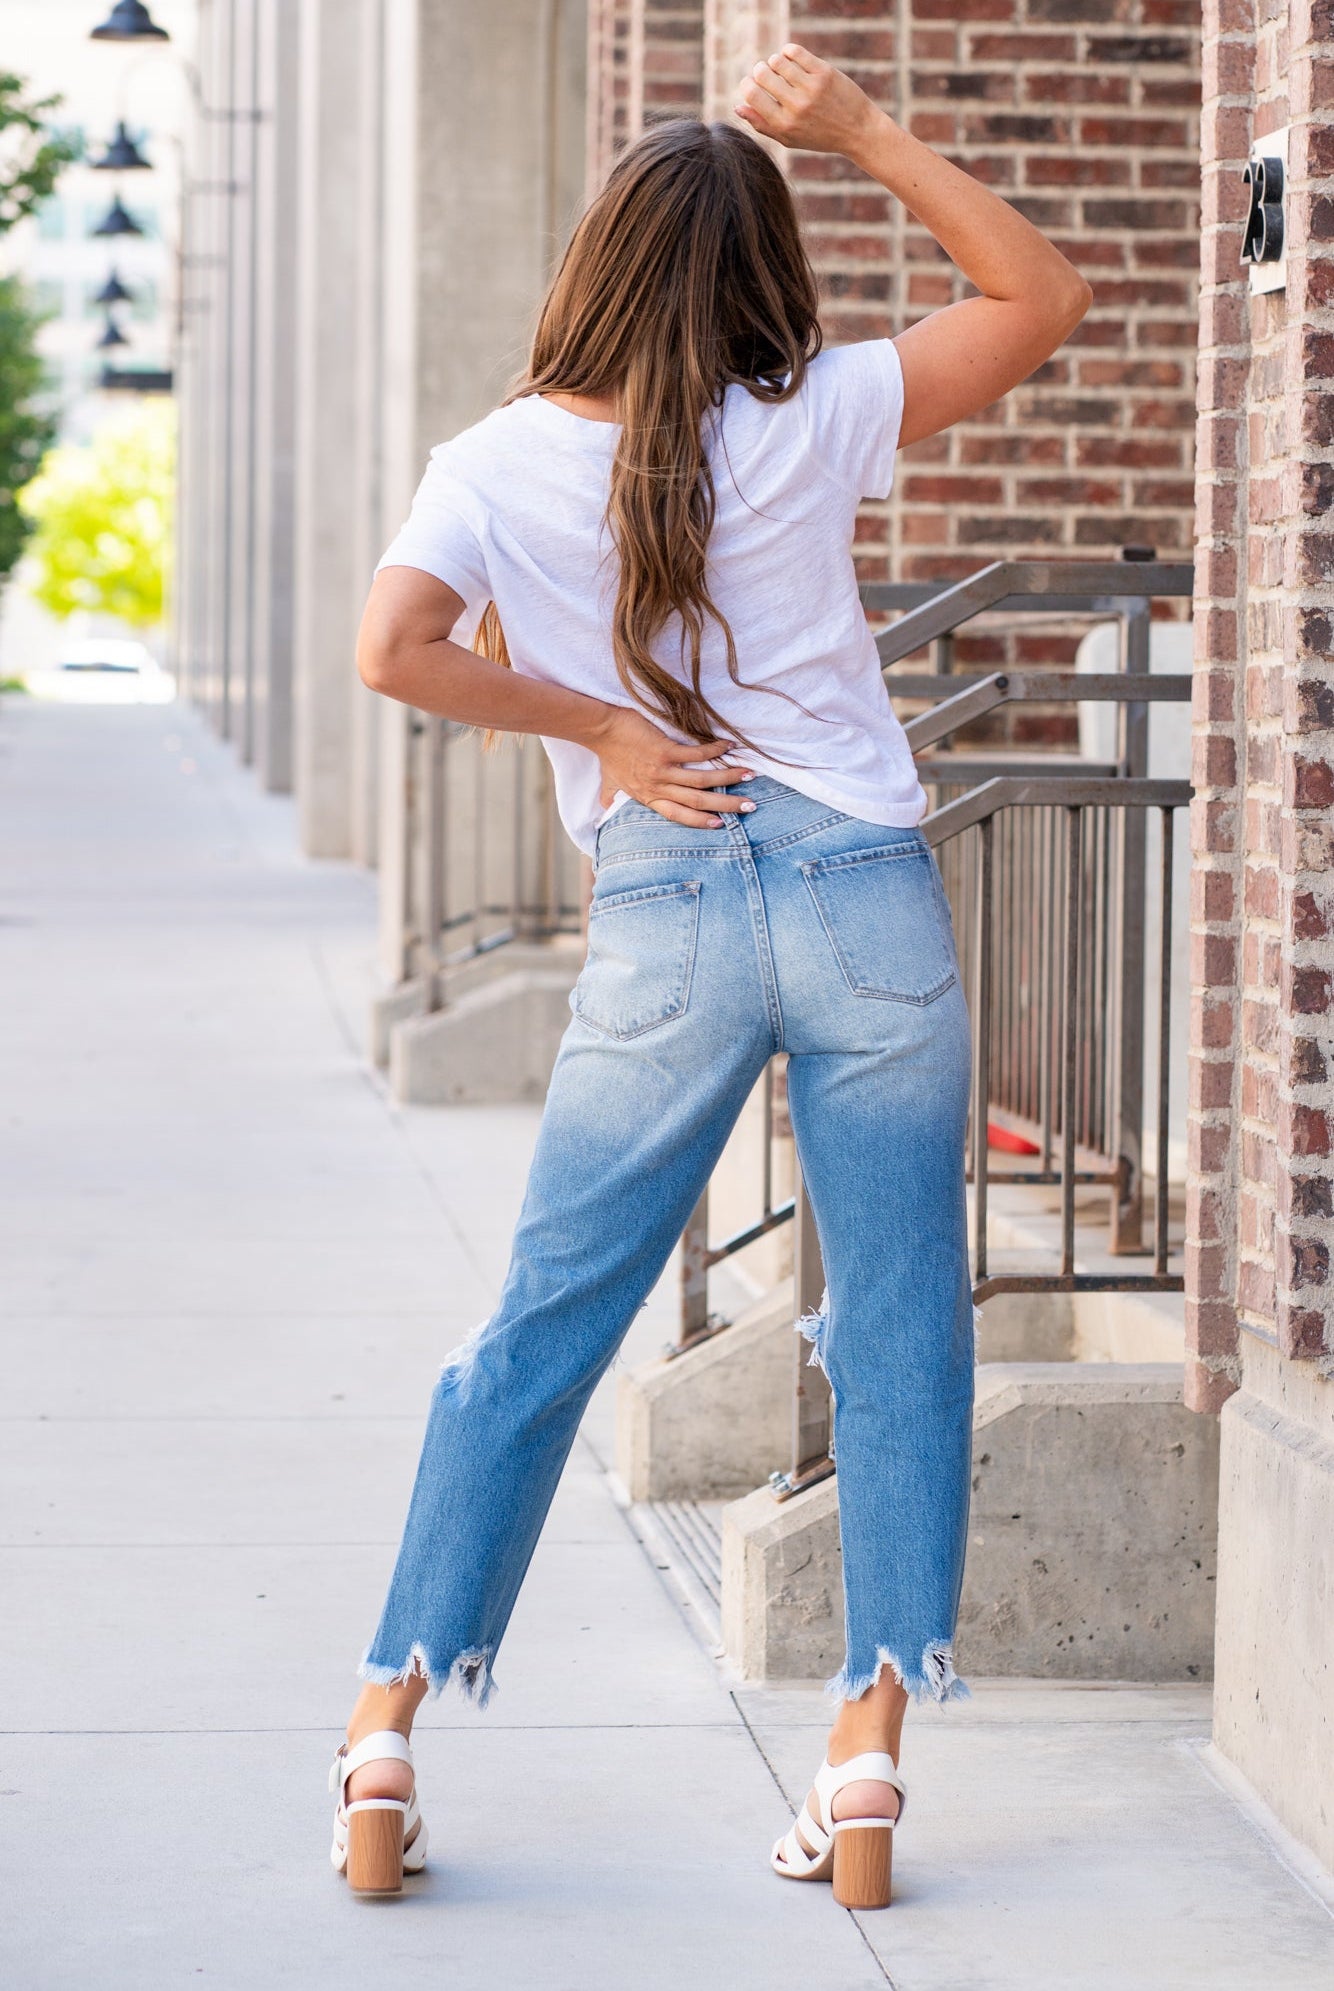 KanCan Jeans  With a high waist and mom fit, these will be your go-to jeans that will never go out of style. Color: Medium Blue  Cut: Mom Fit, 26.5" Inseam* Rise: High-Rise, 11" Front Rise* 100% Cotton Fly: Zipper Style #: KC7180M Contact us for any additional measurements or sizing.  *Measured on the smallest size, measurements may vary by size.